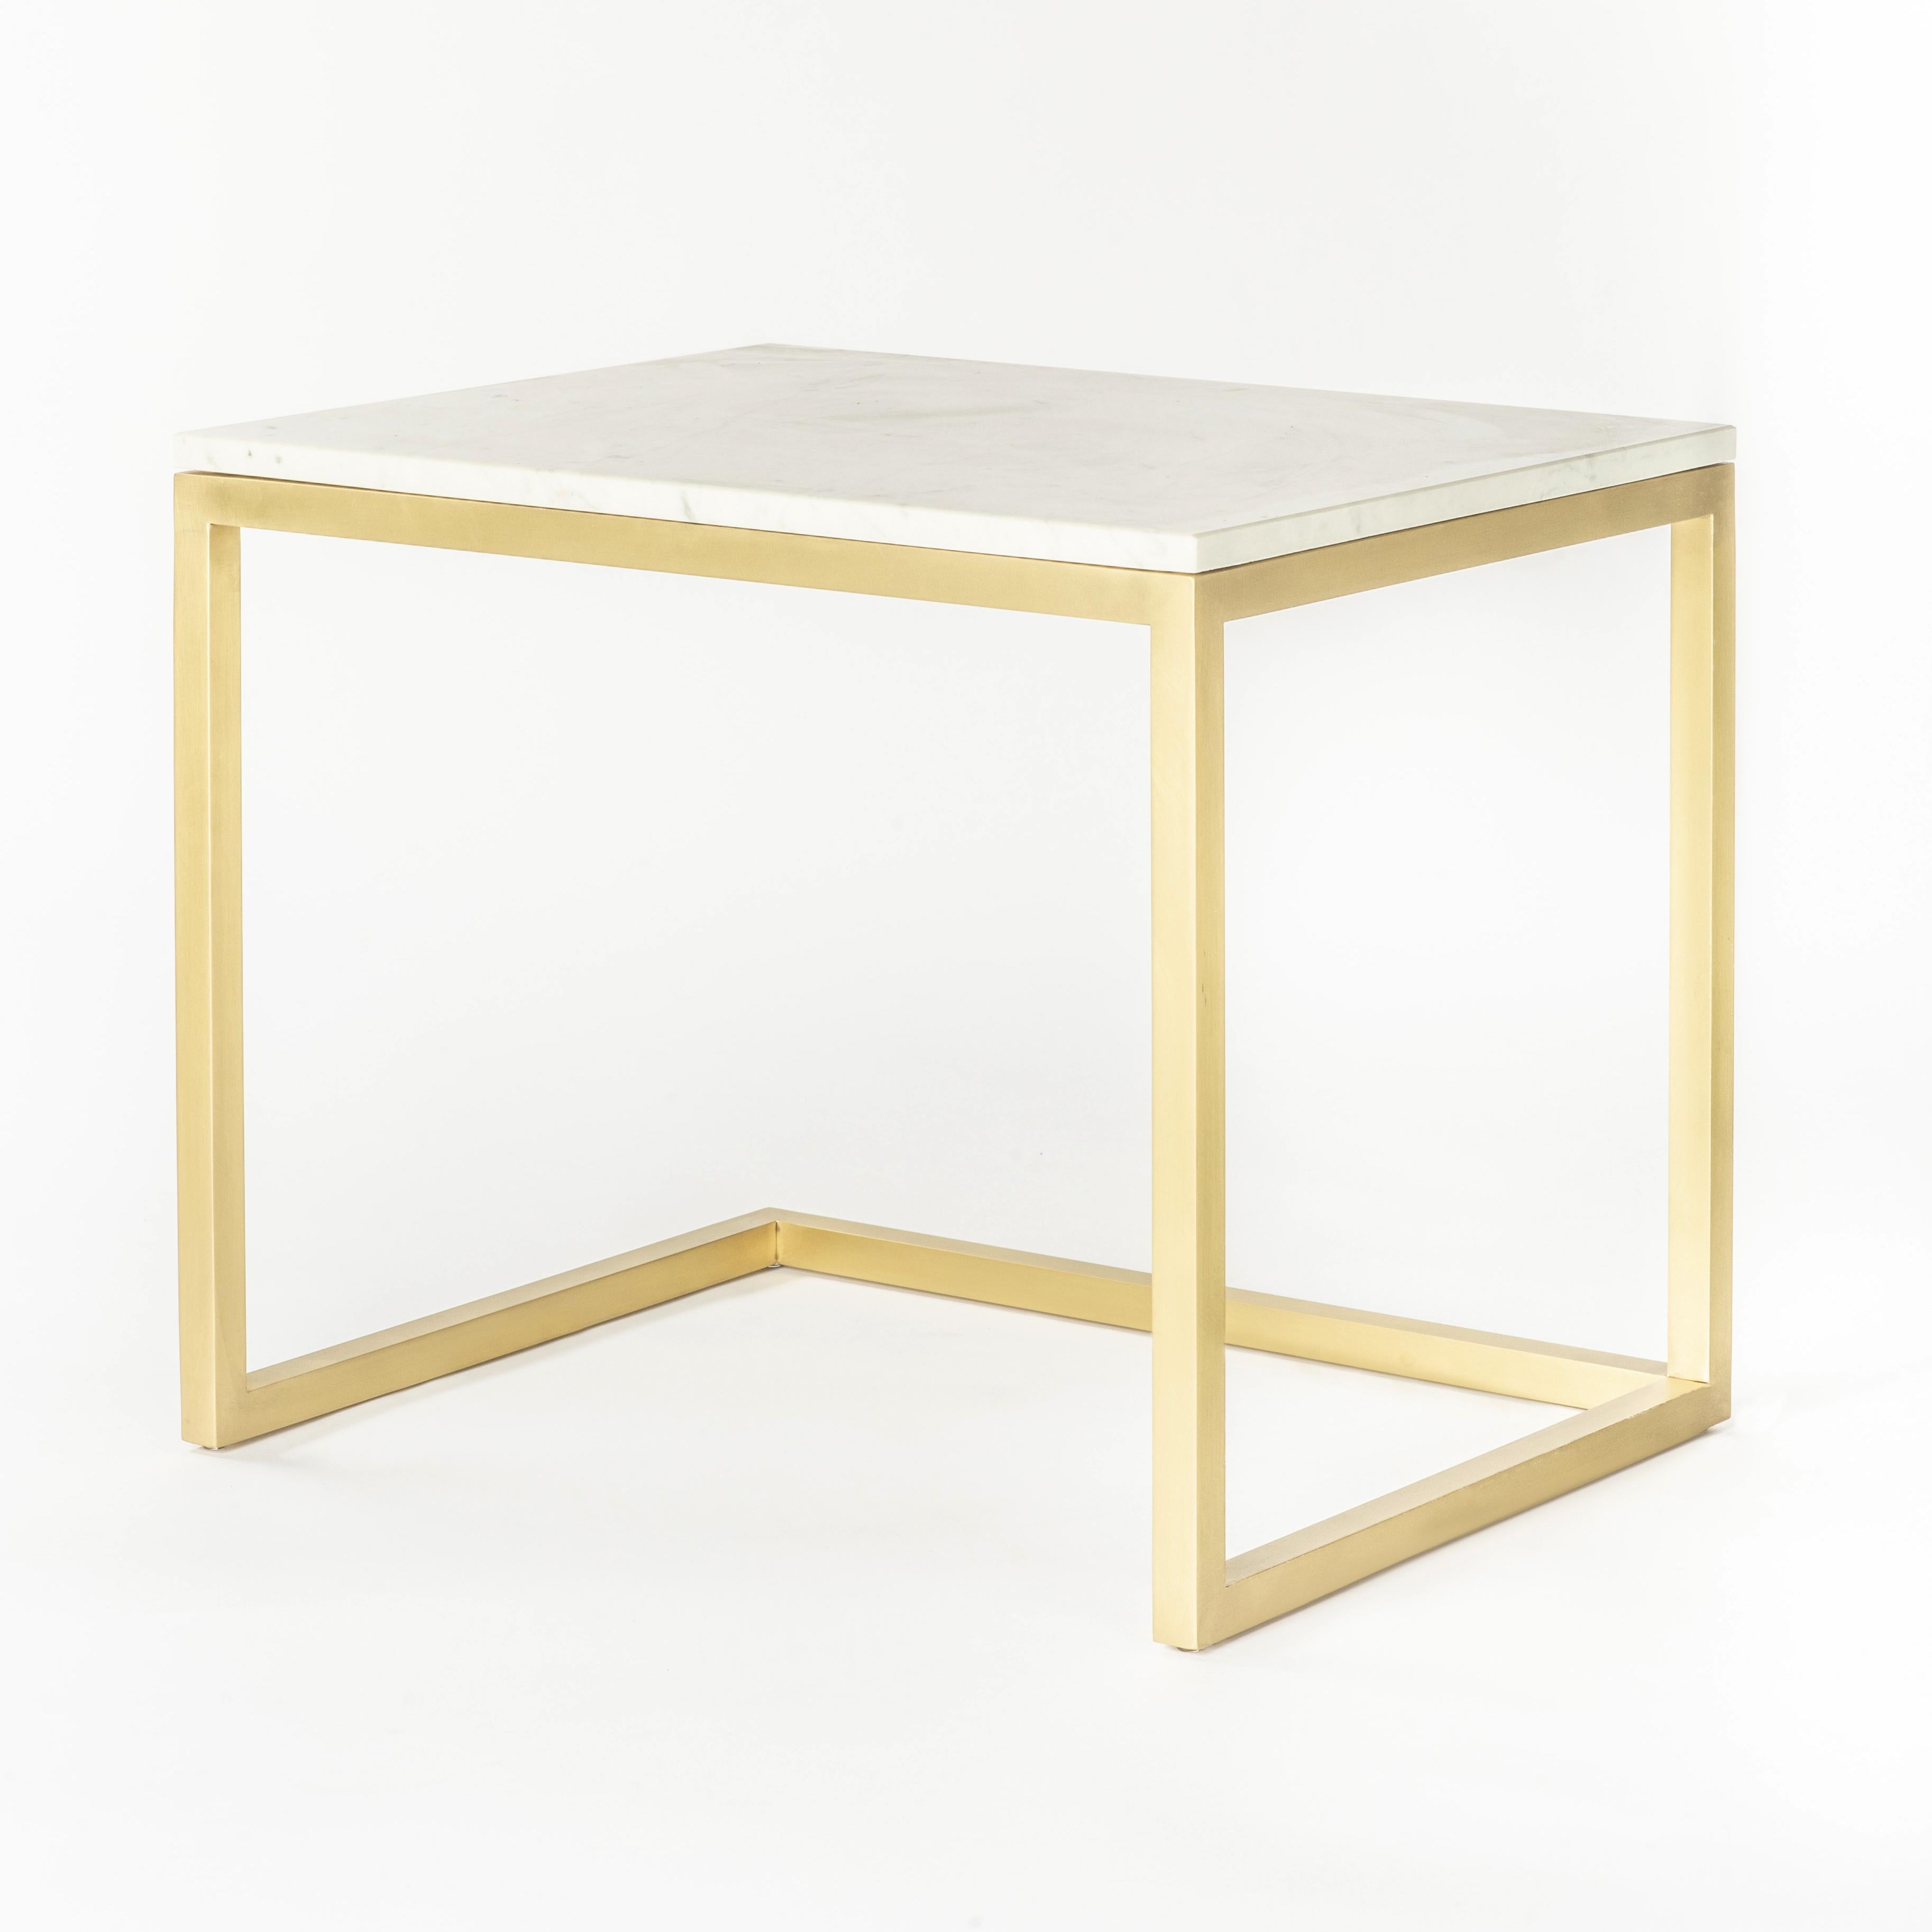 Italian Esopo Modern Handmade Brass Coffee Table with White Carrara Marble Top For Sale